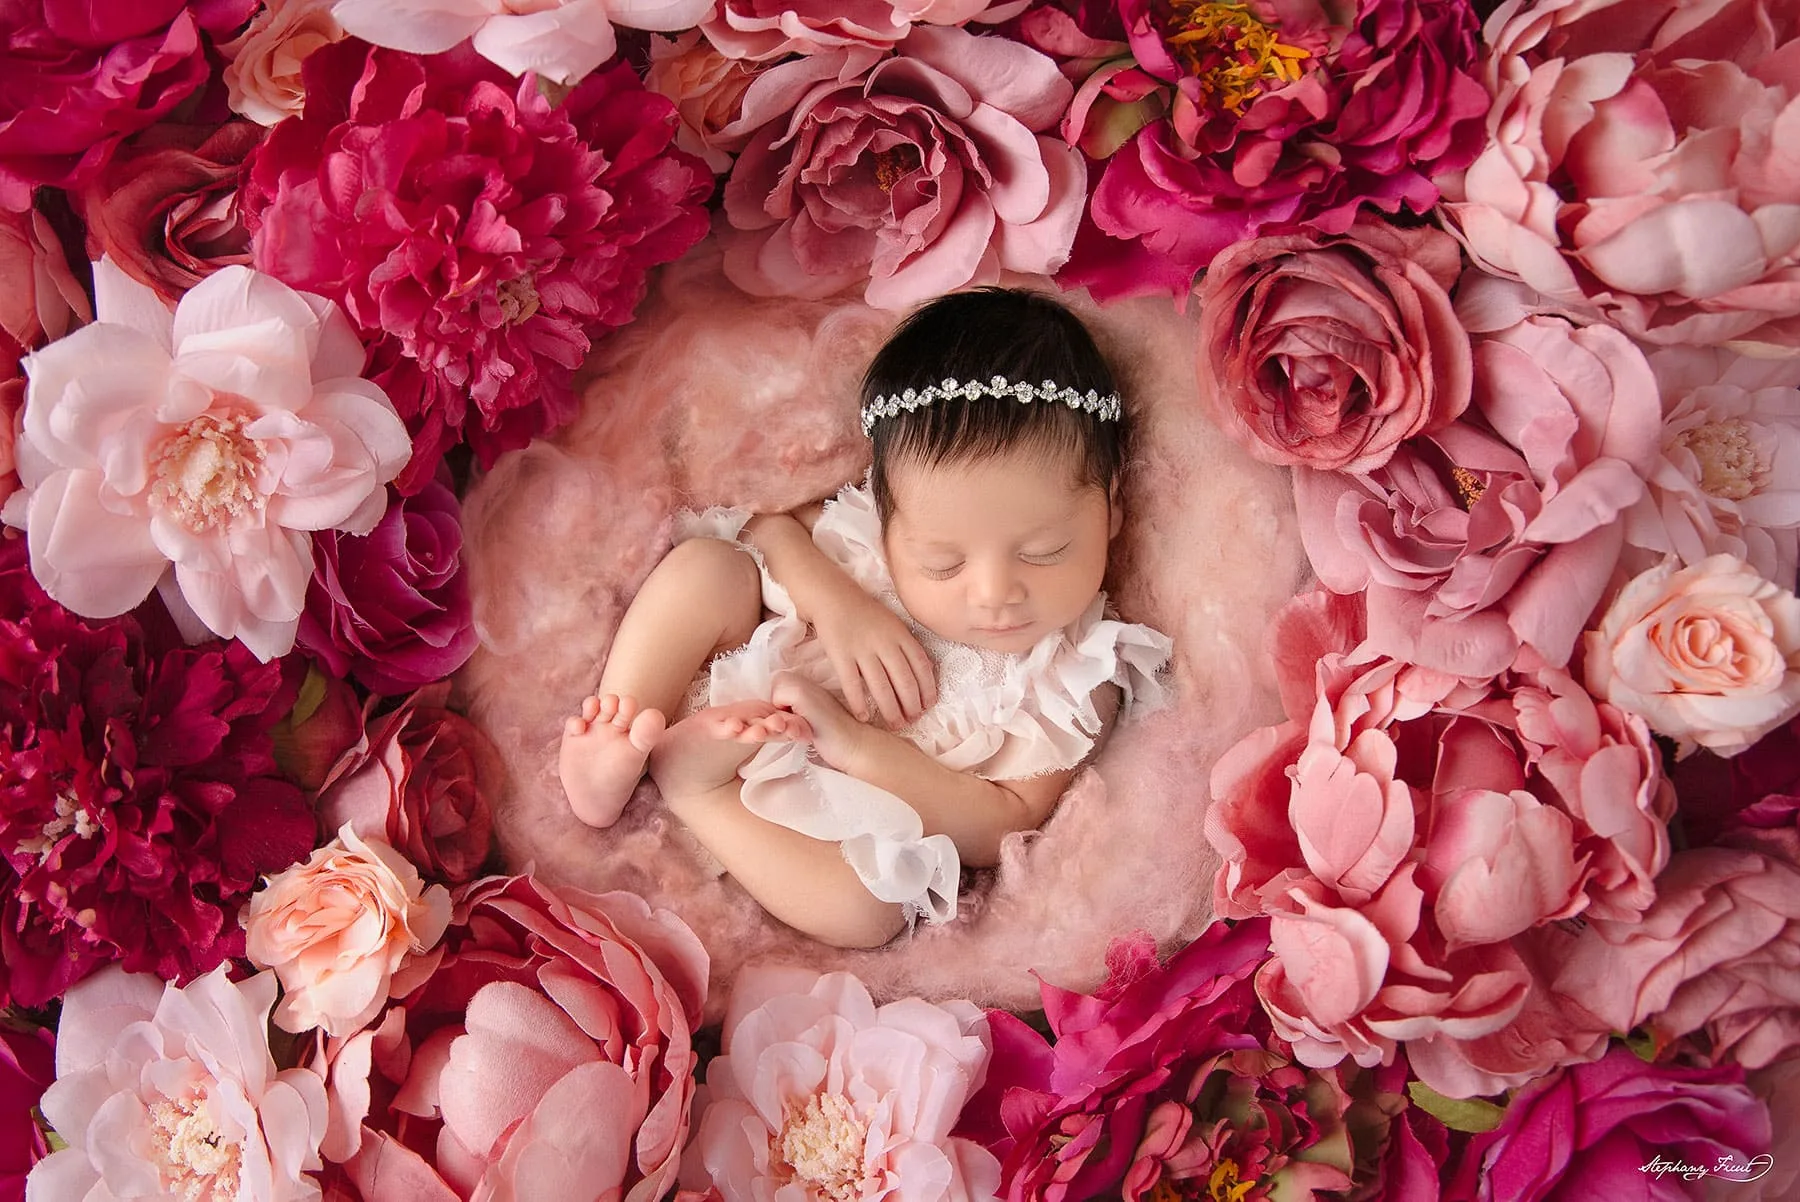 A newborn baby is peacefully sleeping on a fluffy pink blanket, surrounded by vibrant, colorful flowers. The backdrop is adorned with lush, blooming petals, enhancing the soft, delicate atmosphere of the scene. The baby is dressed in a simple, light pink outfit, blending harmoniously with the floral theme. The overall image exudes a warm and cheerful ambiance, capturing the innocence and beauty of the newborn. This setup by Stephany Ficut showcases a creative and charming newborn photoshoot theme.